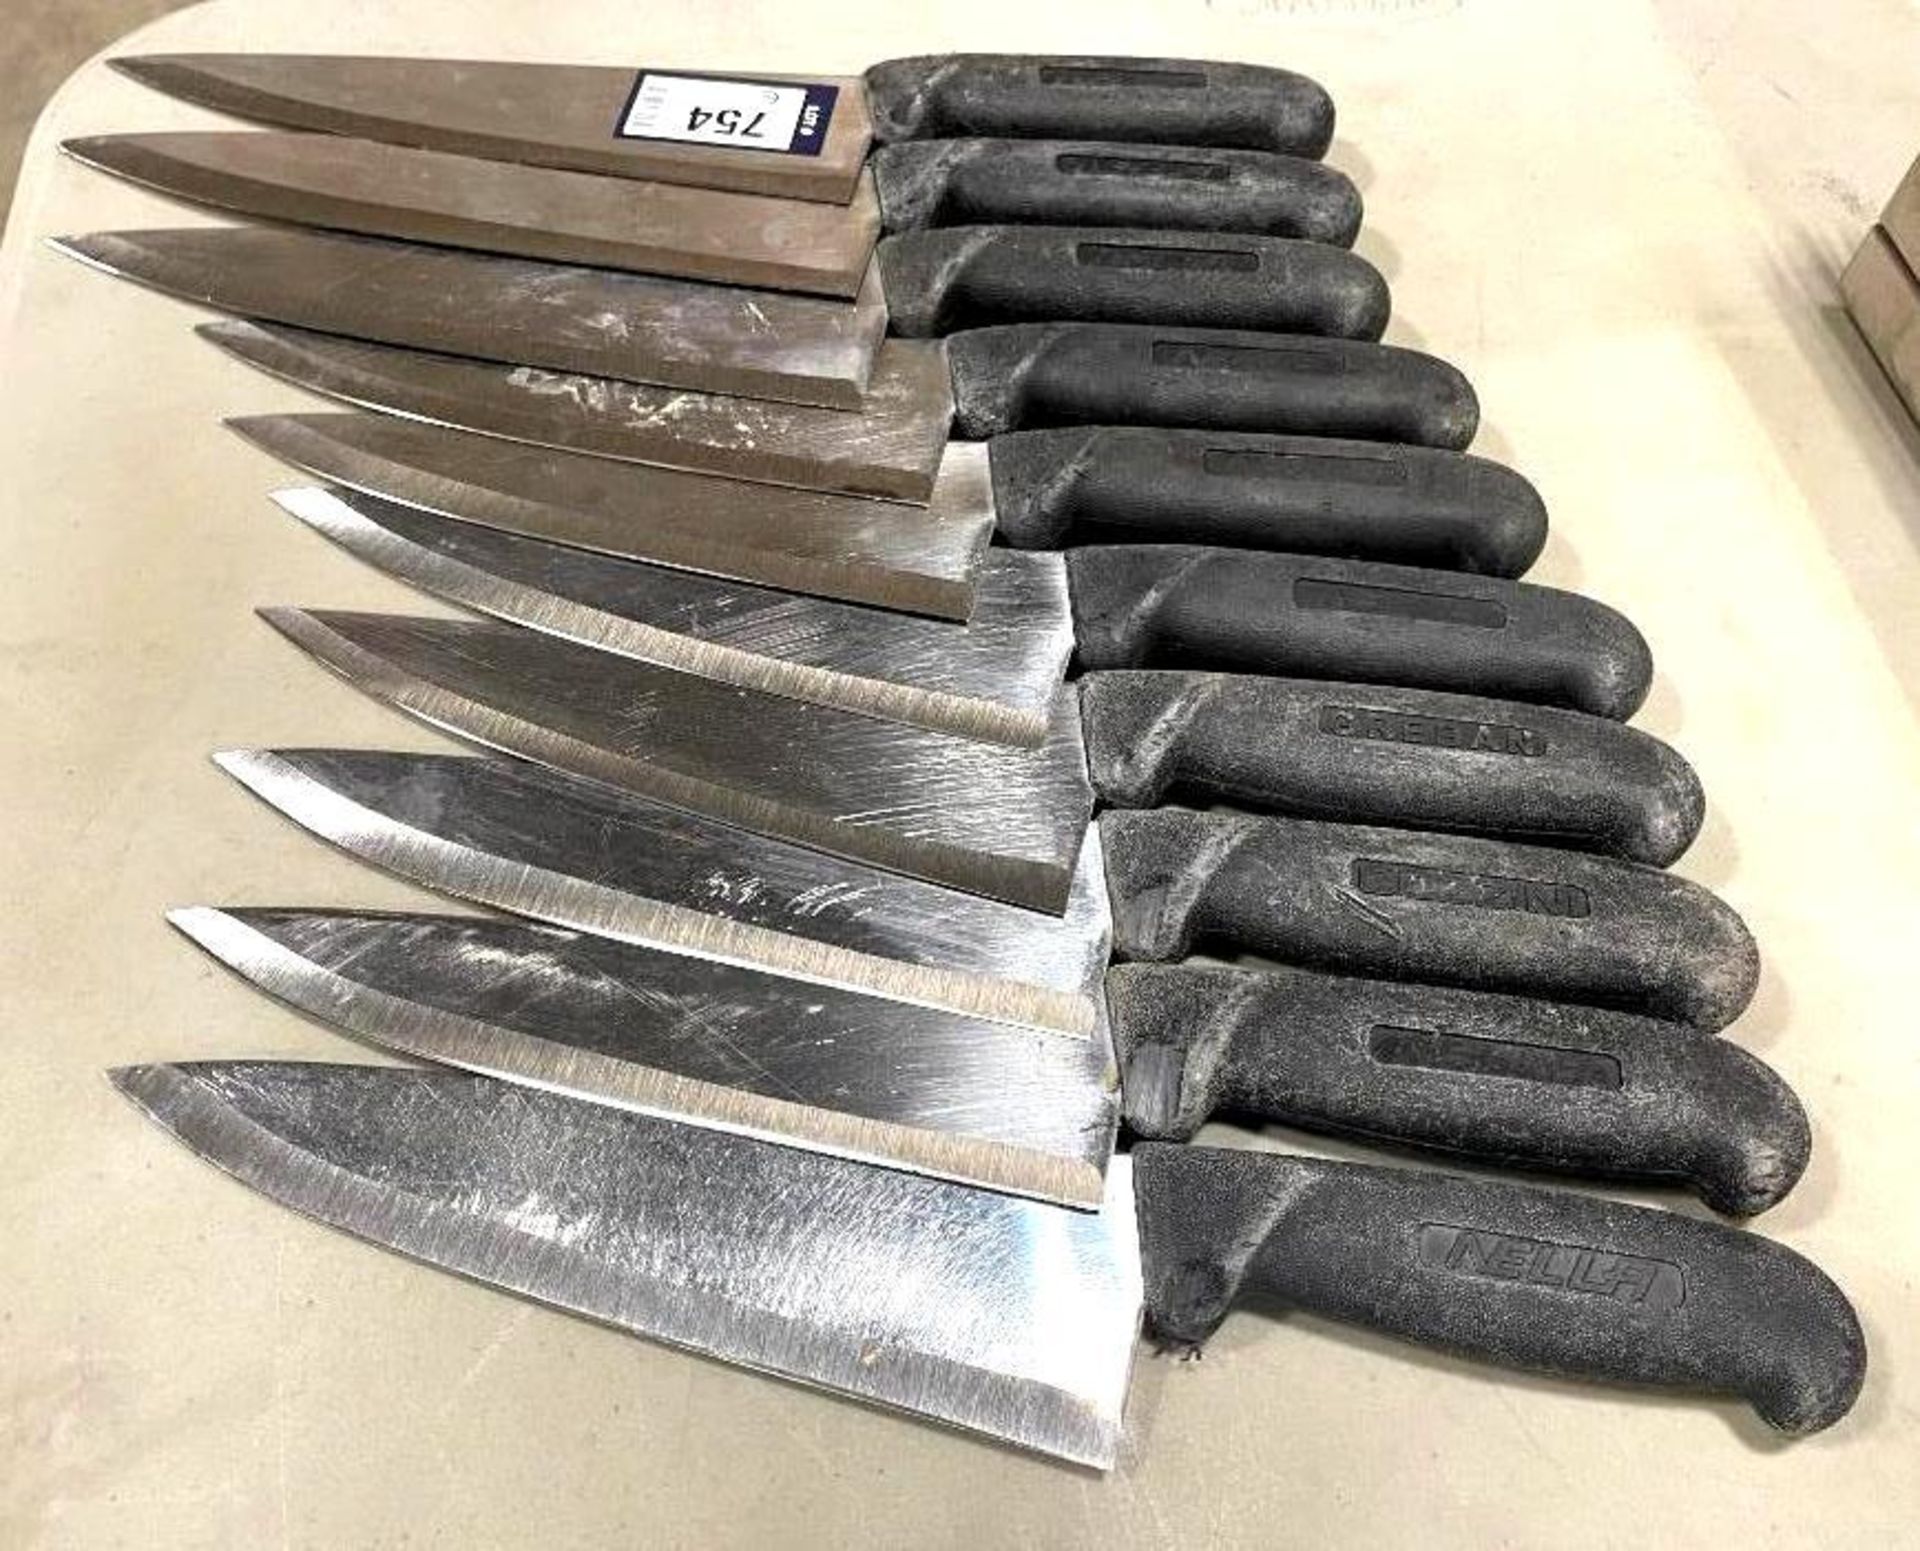 LOT OF 10 USED SHARPENED KNIVES